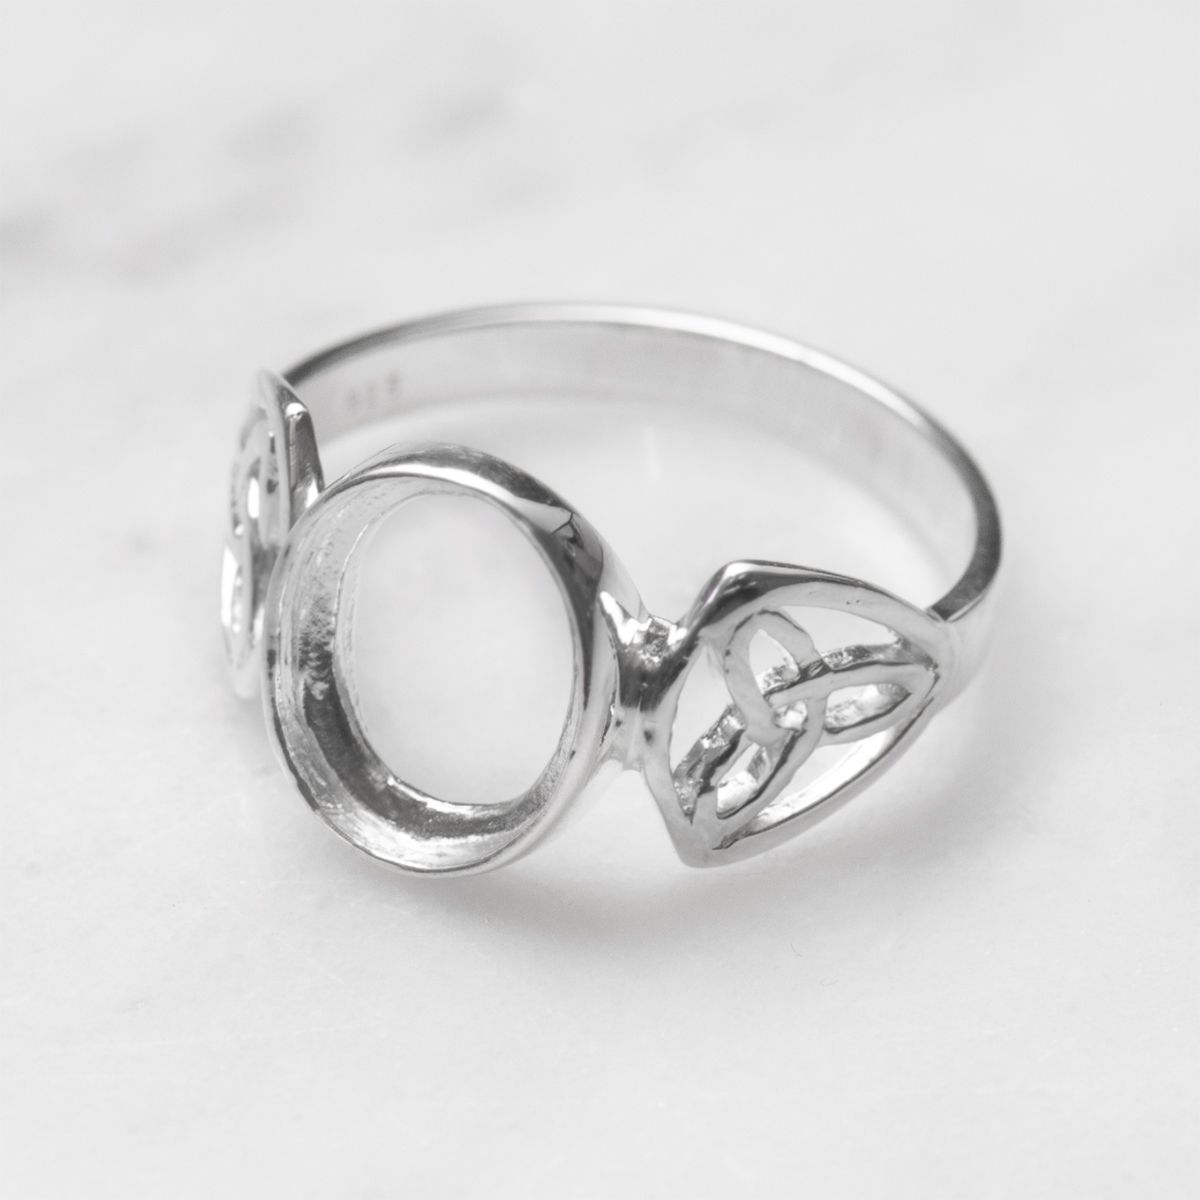 New jewelry findings by 925CRAFT - silver settings for stones and